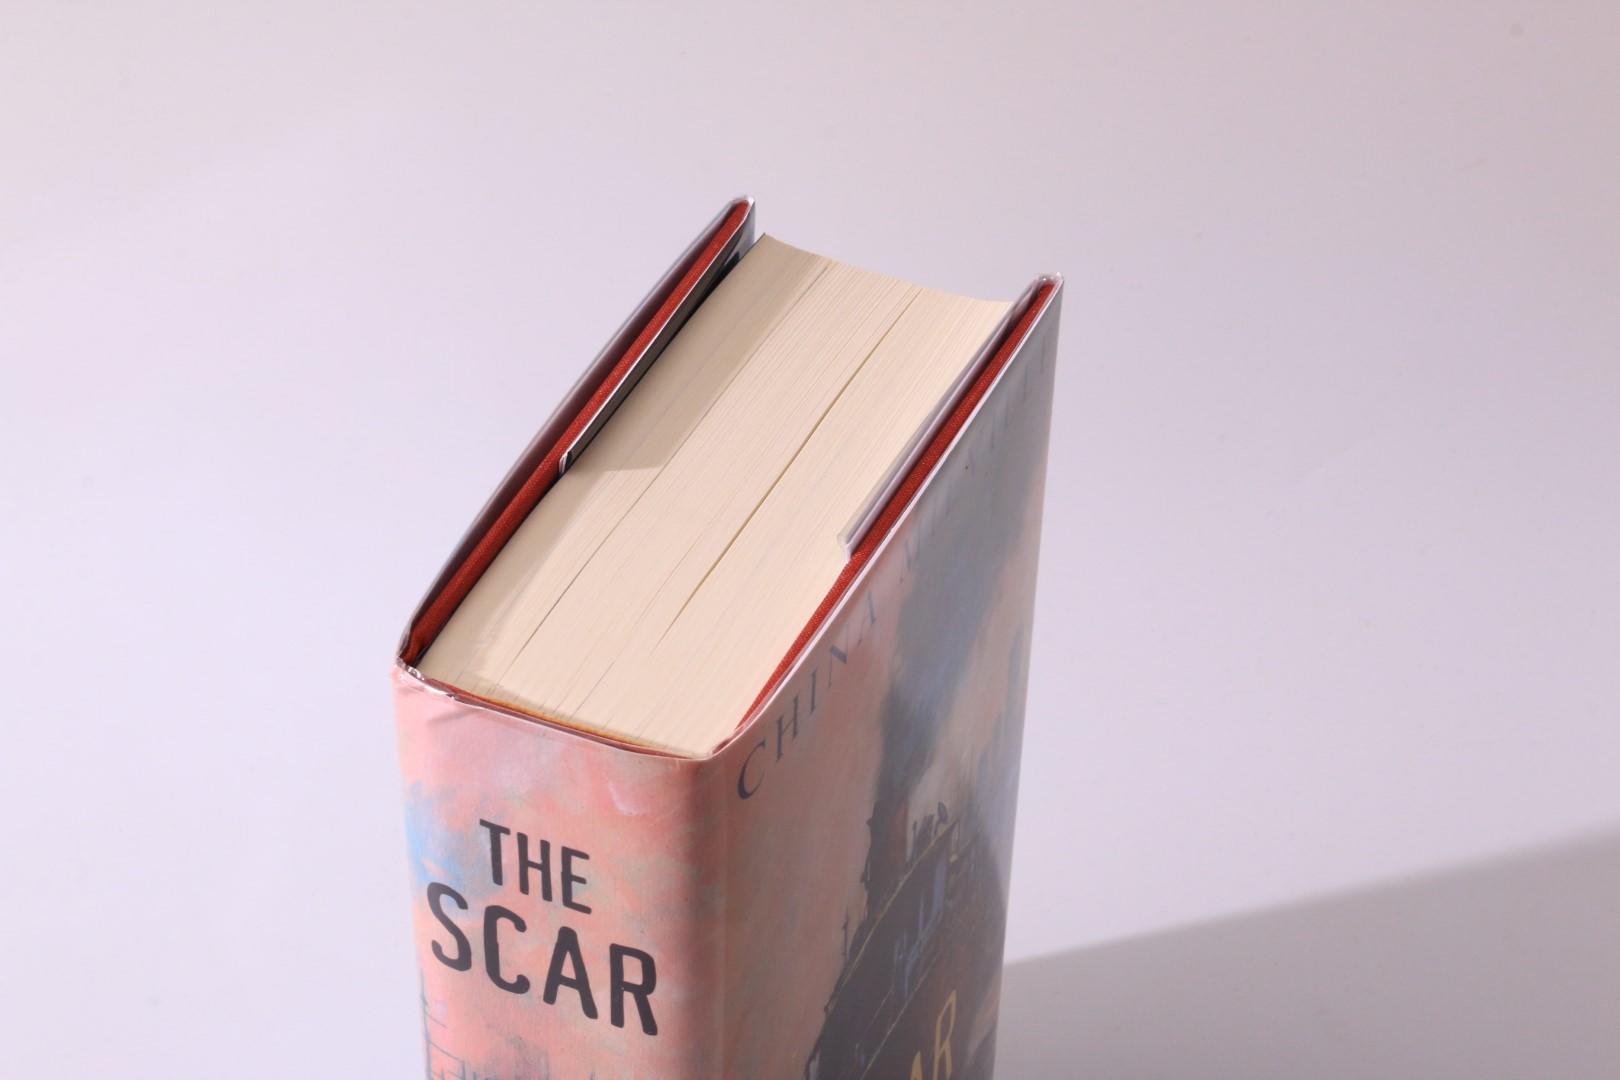 China Mieville - The Scar - Subterranean Press, 2019, Signed Limited Edition.